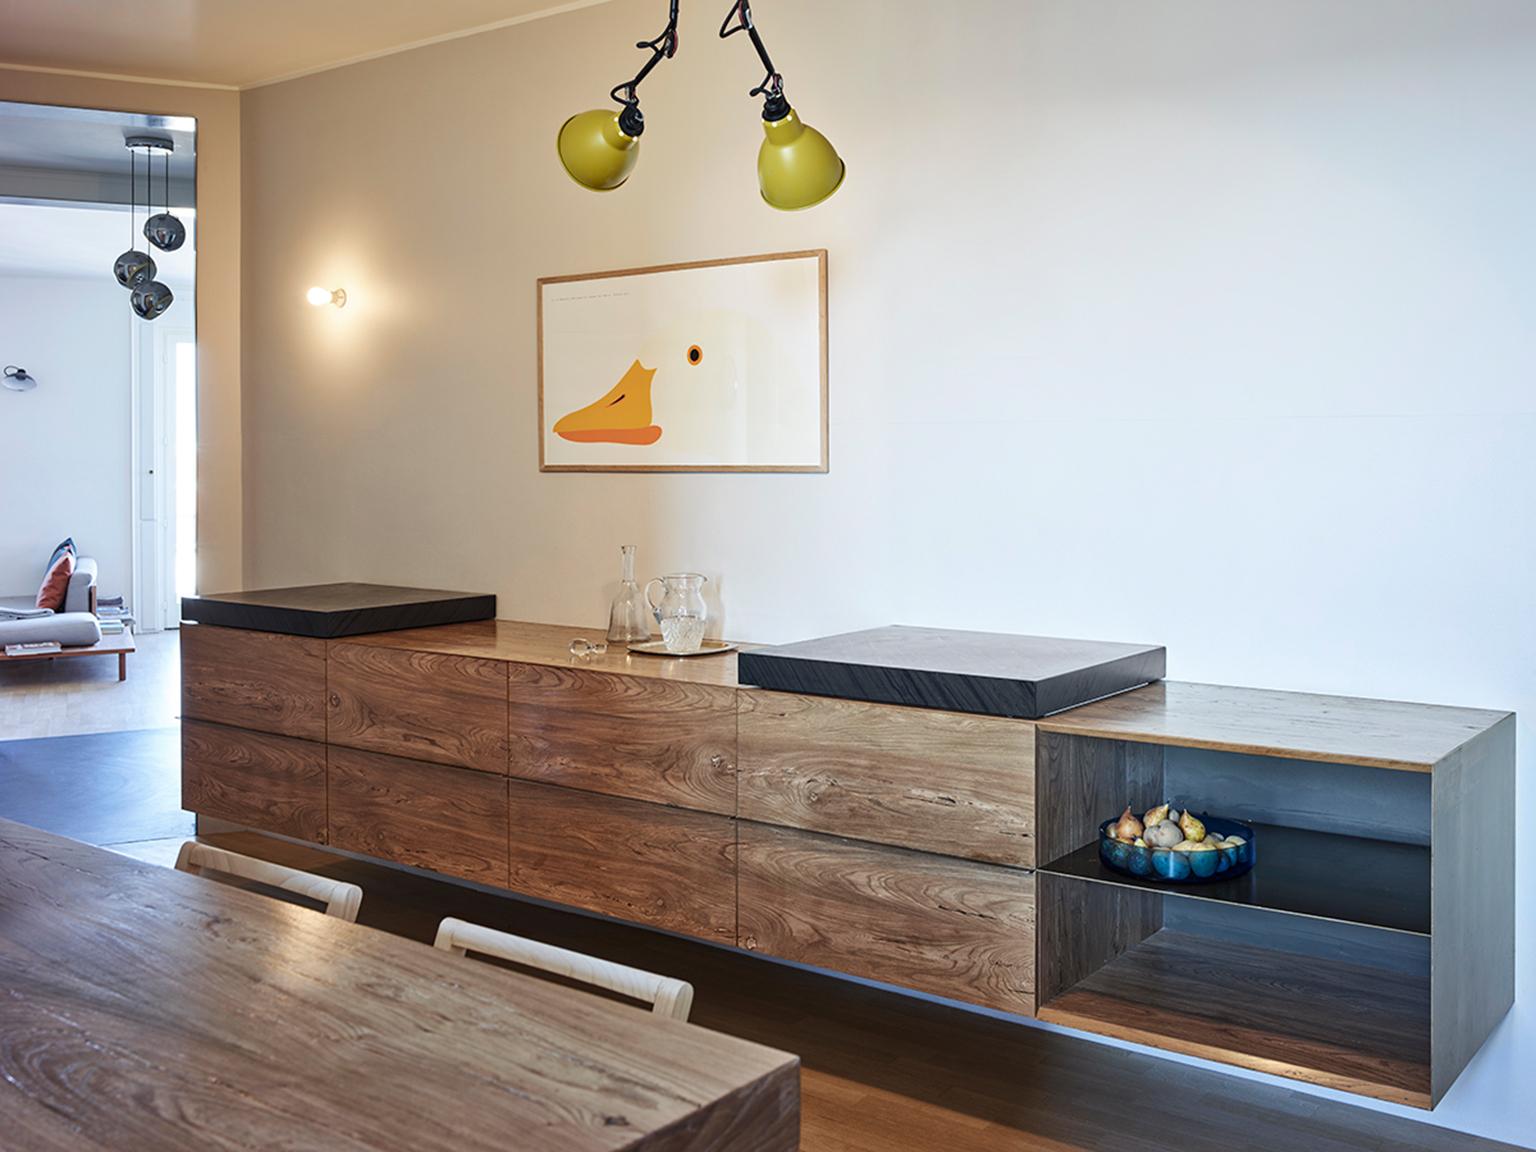 Kitchen with fossil elm finished transparent matt suspended volume. Sliding ocean black cutting boards.
Natural elm finished transparent matt drawers and accessories.
Wall unit painted like the wall.